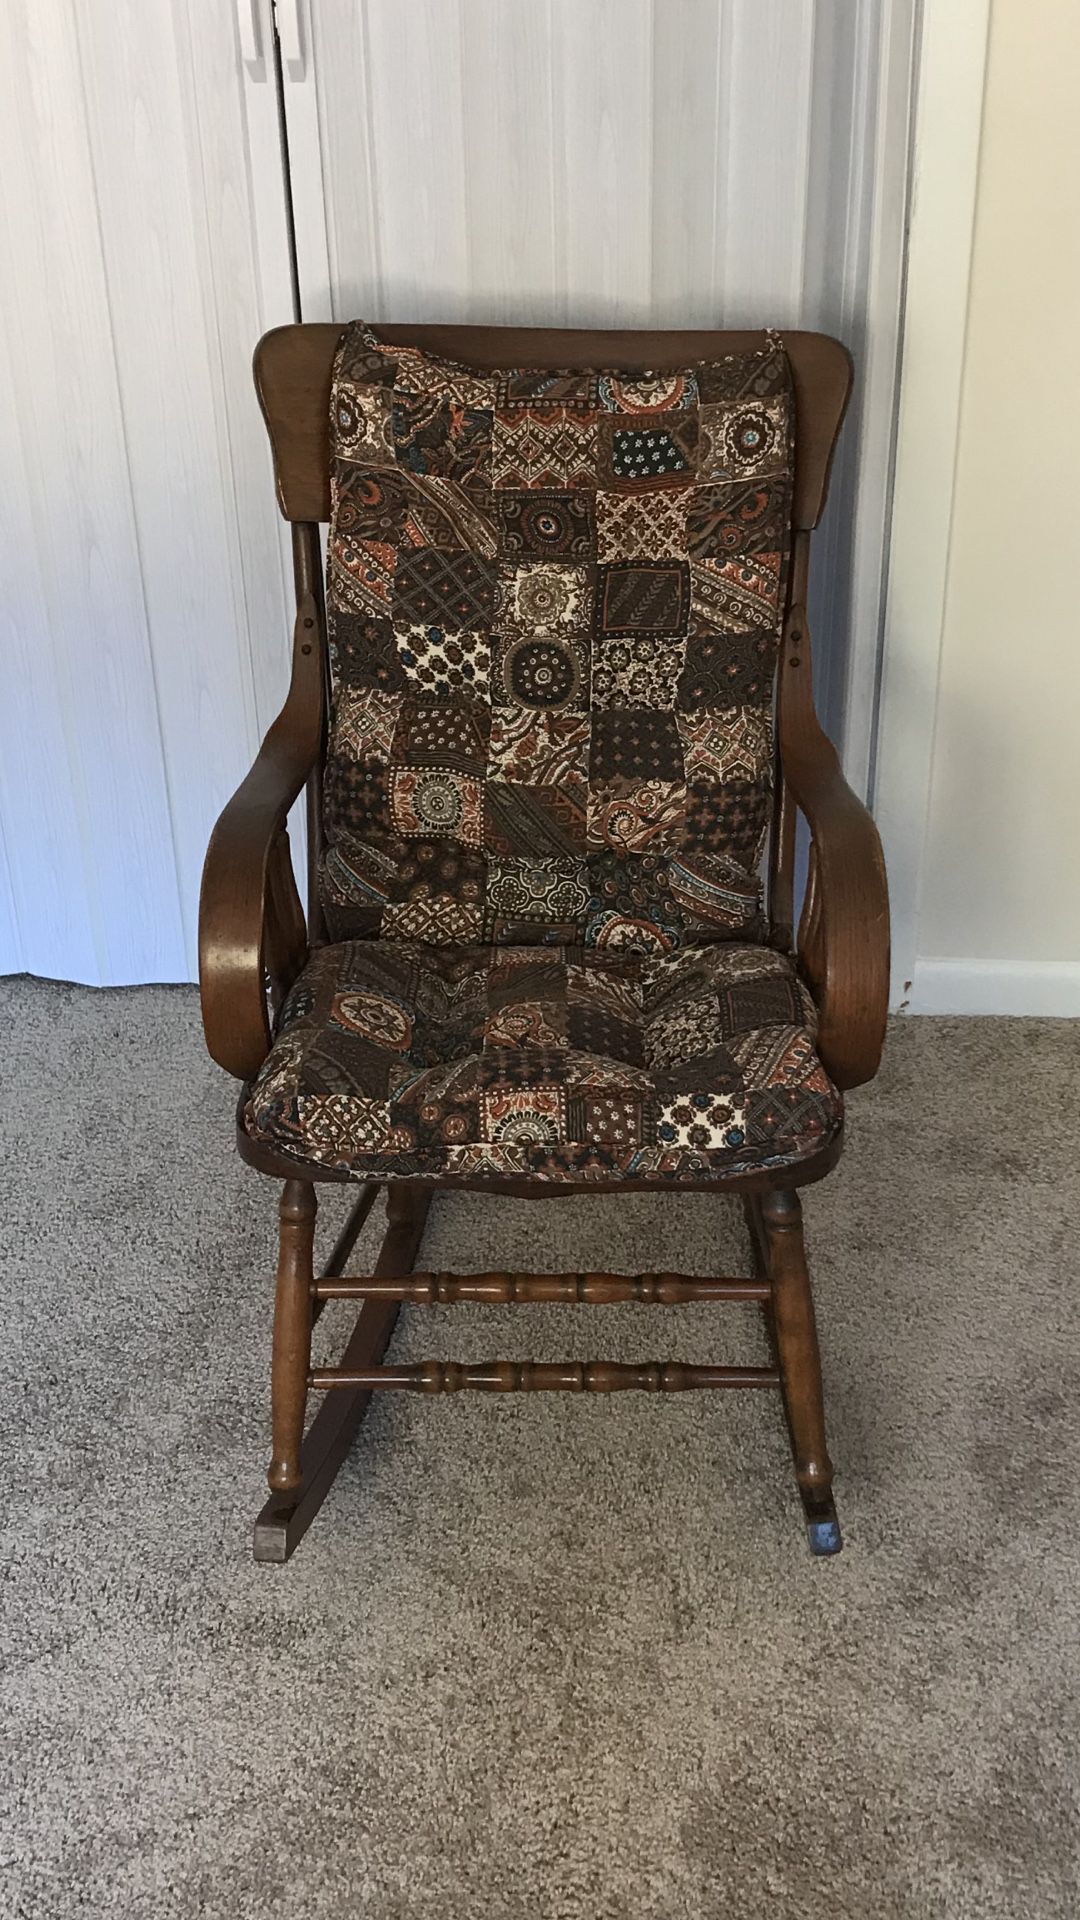 Rocking Chair with cushion $15